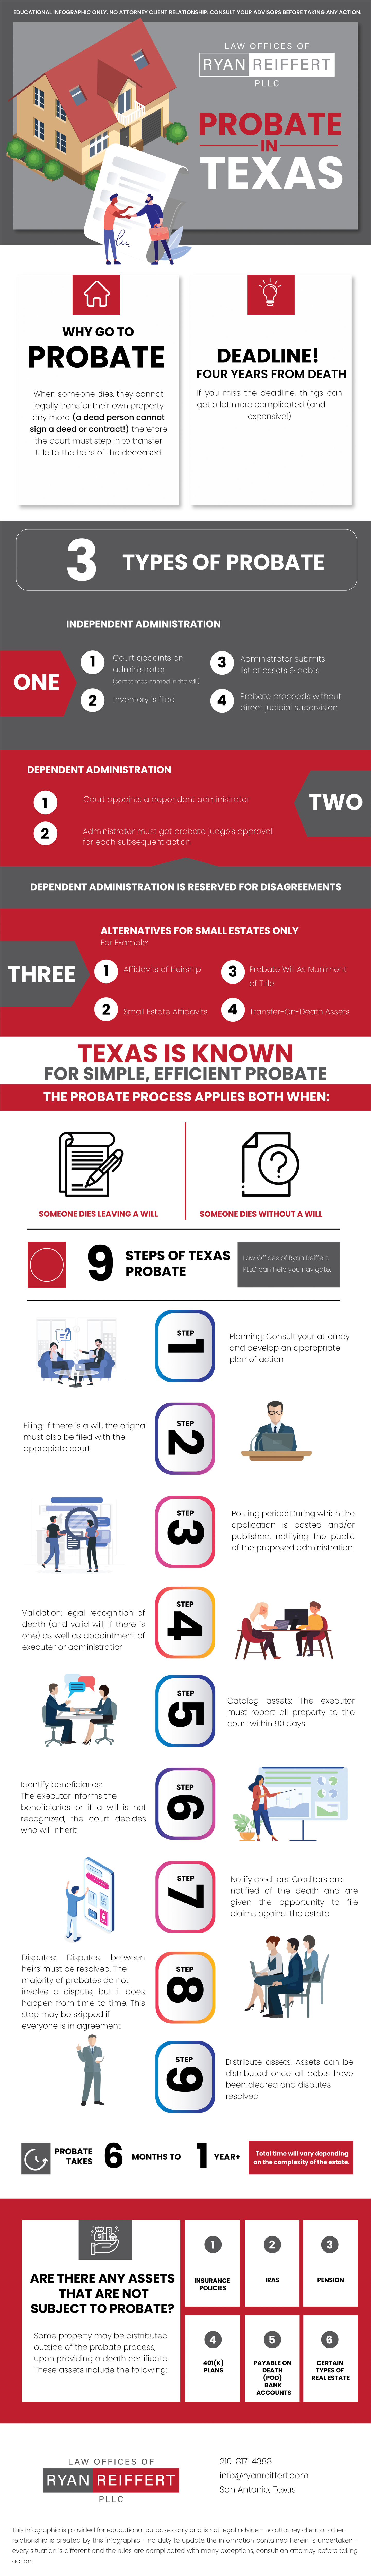 large infographic describing details of the probate system in Texas